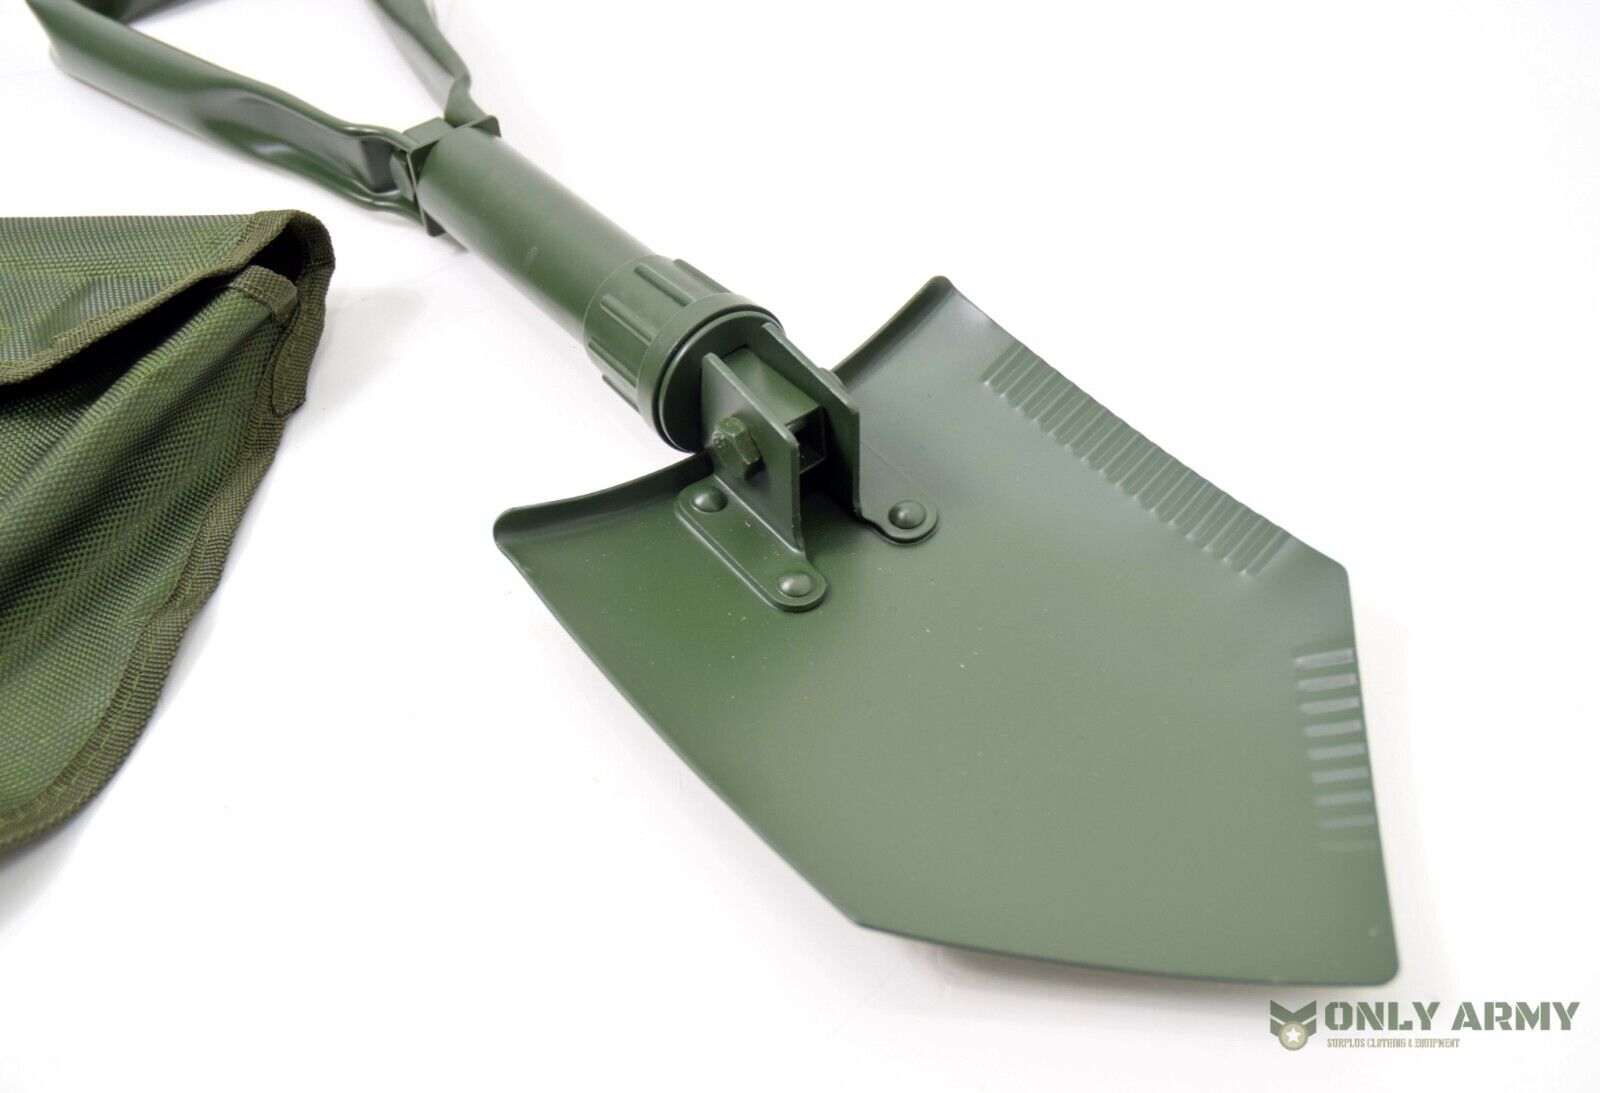 British Army Style Entrenching Tool Shovel Tri Fold Folding Shovel With Pouch